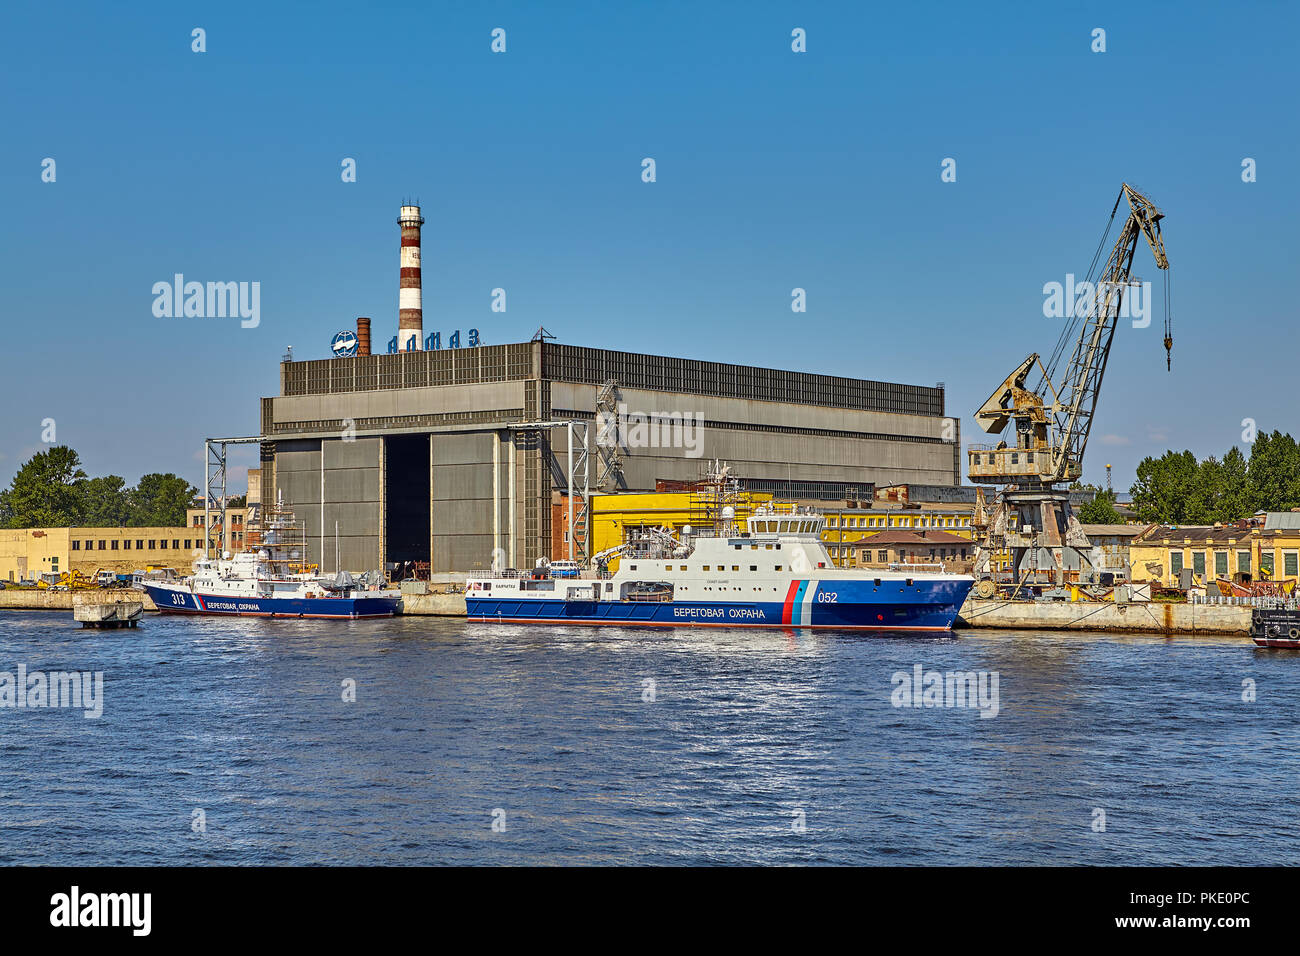 St. Petersburg, Russia - July 19, 2018: Shipbuilding Company Almaz  is located in Petrovsky island in direct vicinity of the Gulf of Finland. Stock Photo